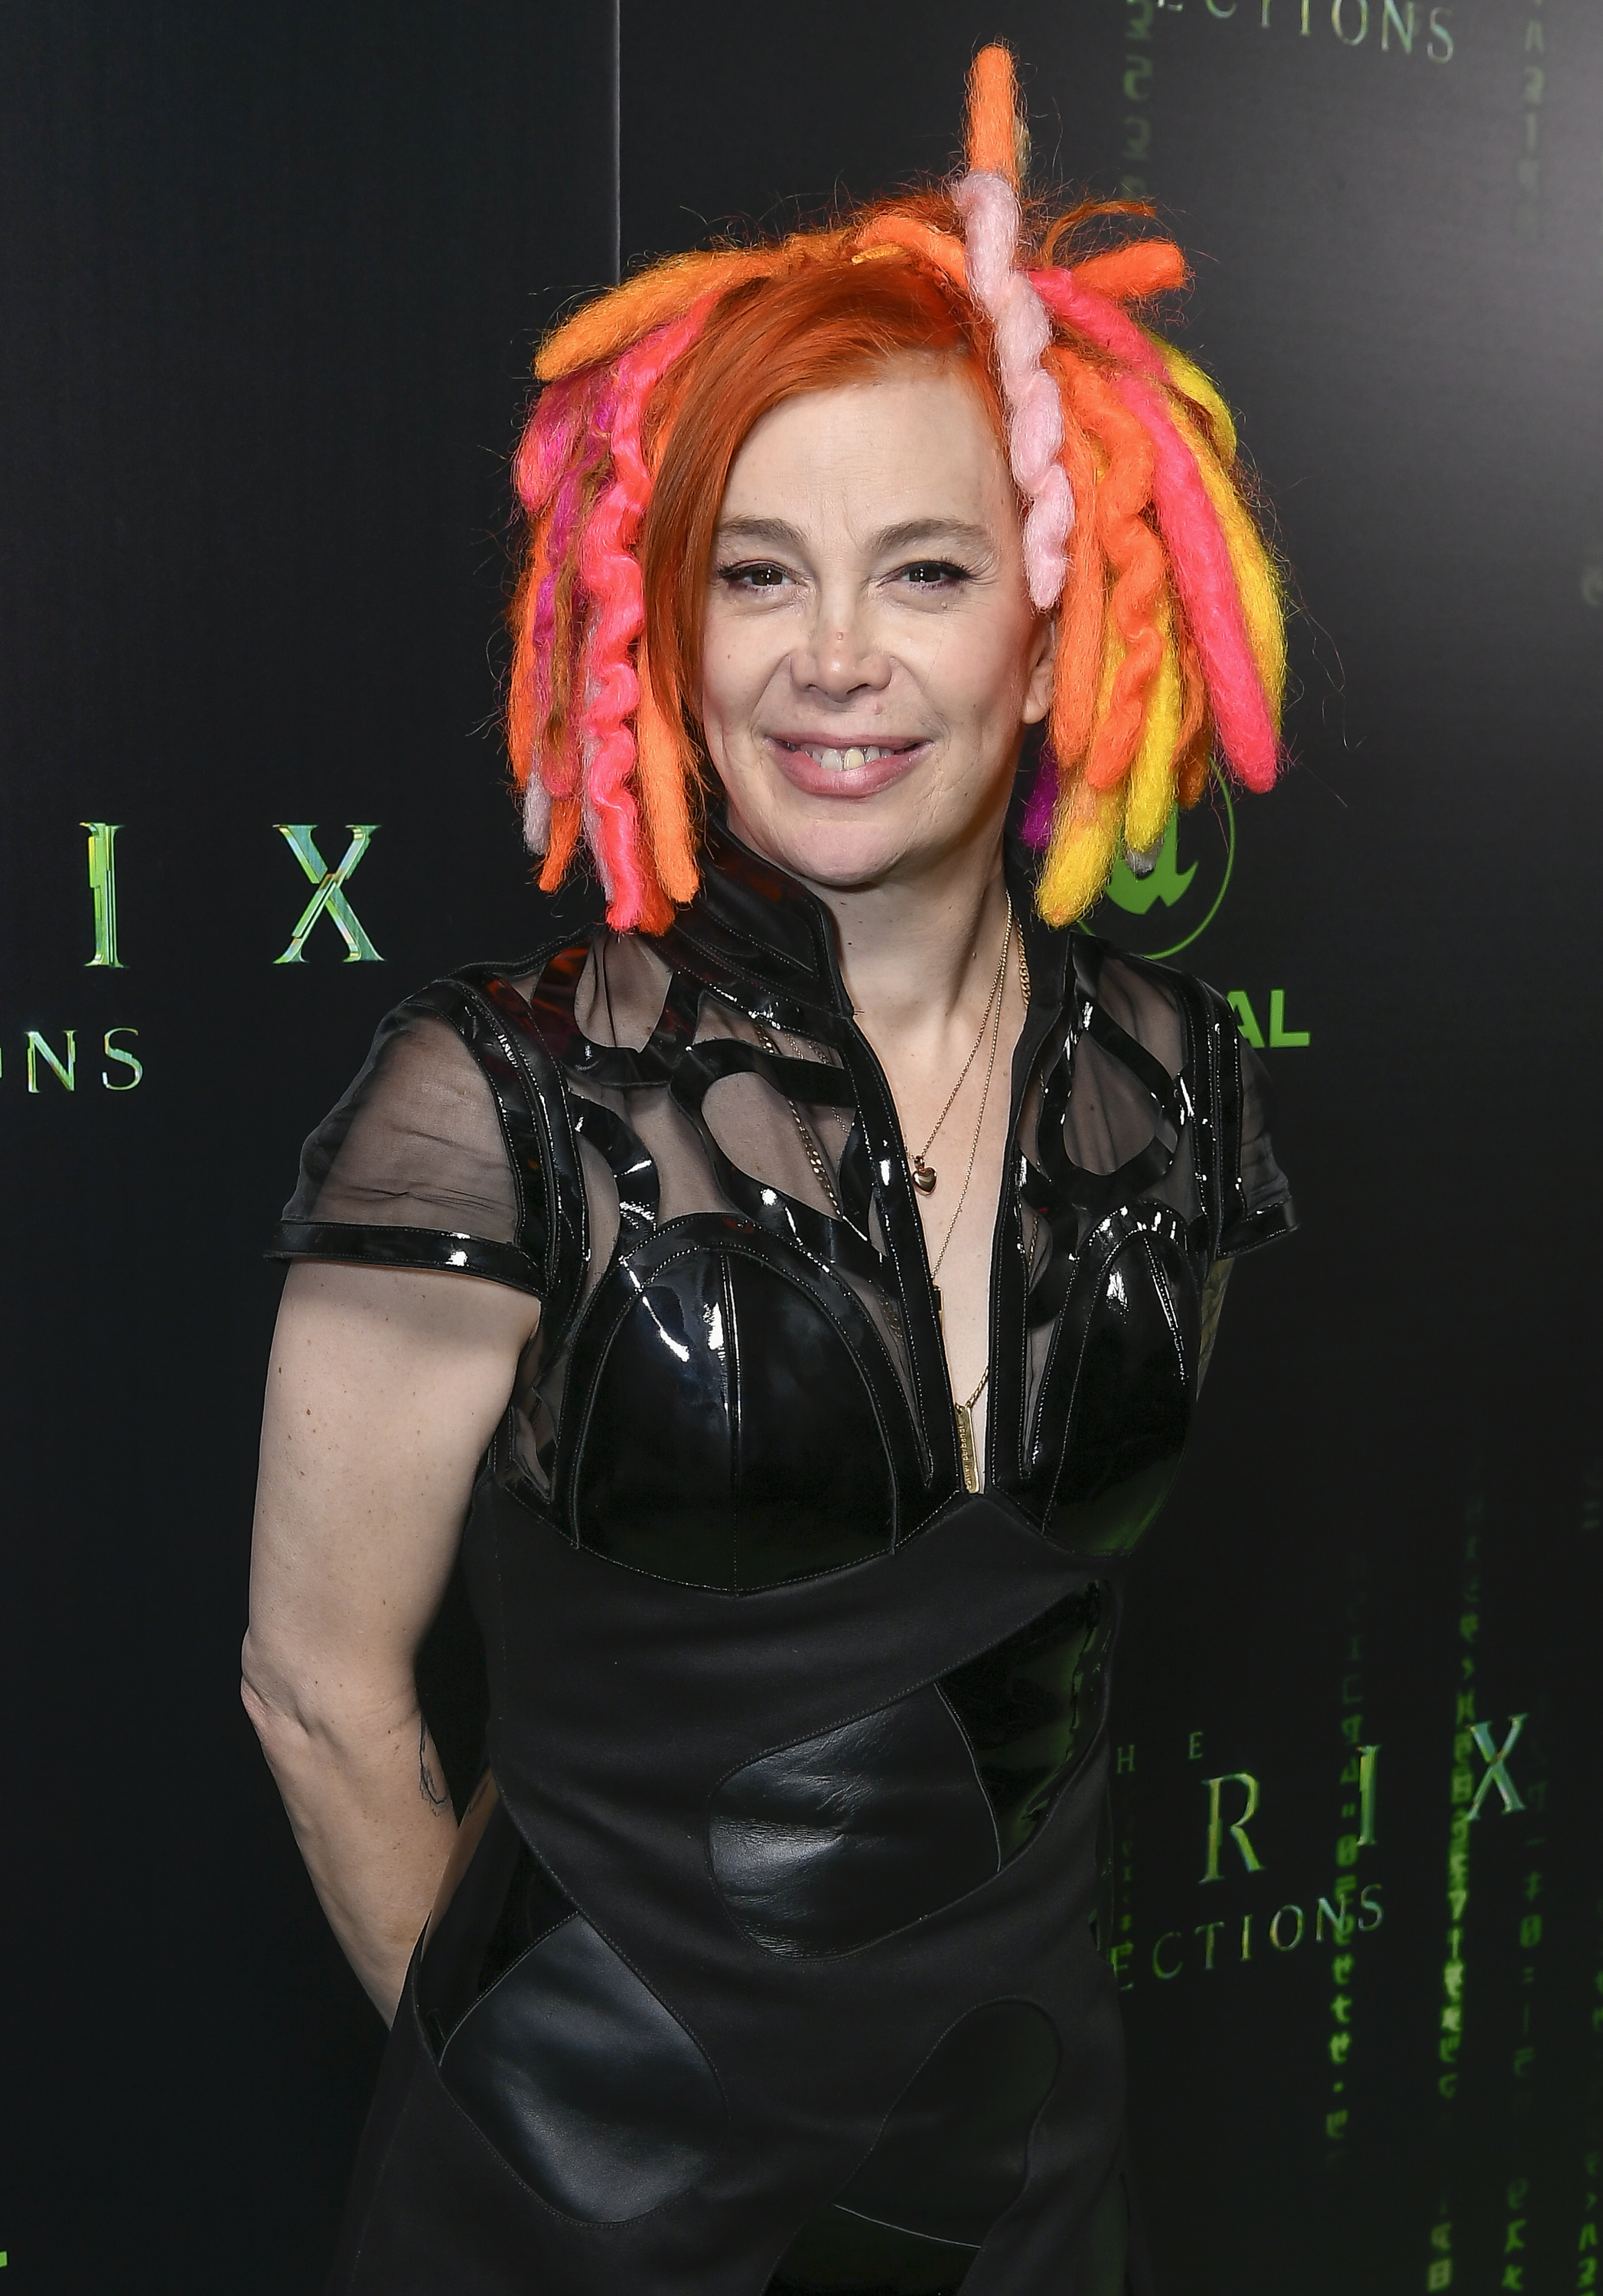 Lana Wachowski attends "The Matrix Resurrections" Red Carpet U.S. Premiere Screening at The Castro Theatre on December 18, 2021 in San Francisco, California. | Source: Getty Images